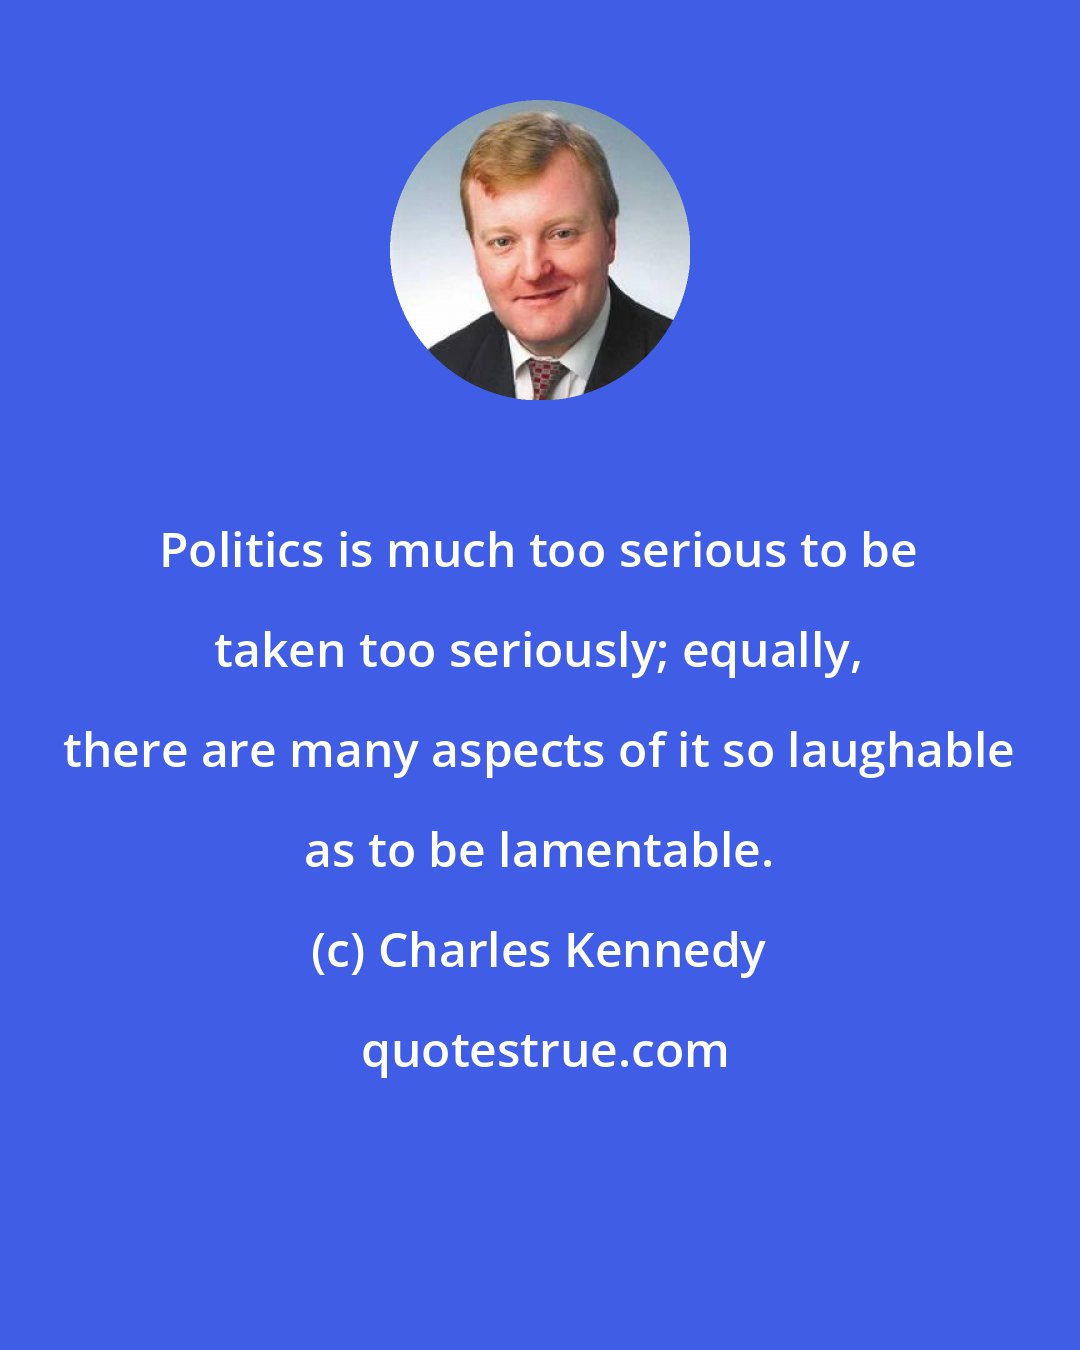 Charles Kennedy: Politics is much too serious to be taken too seriously; equally, there are many aspects of it so laughable as to be lamentable.